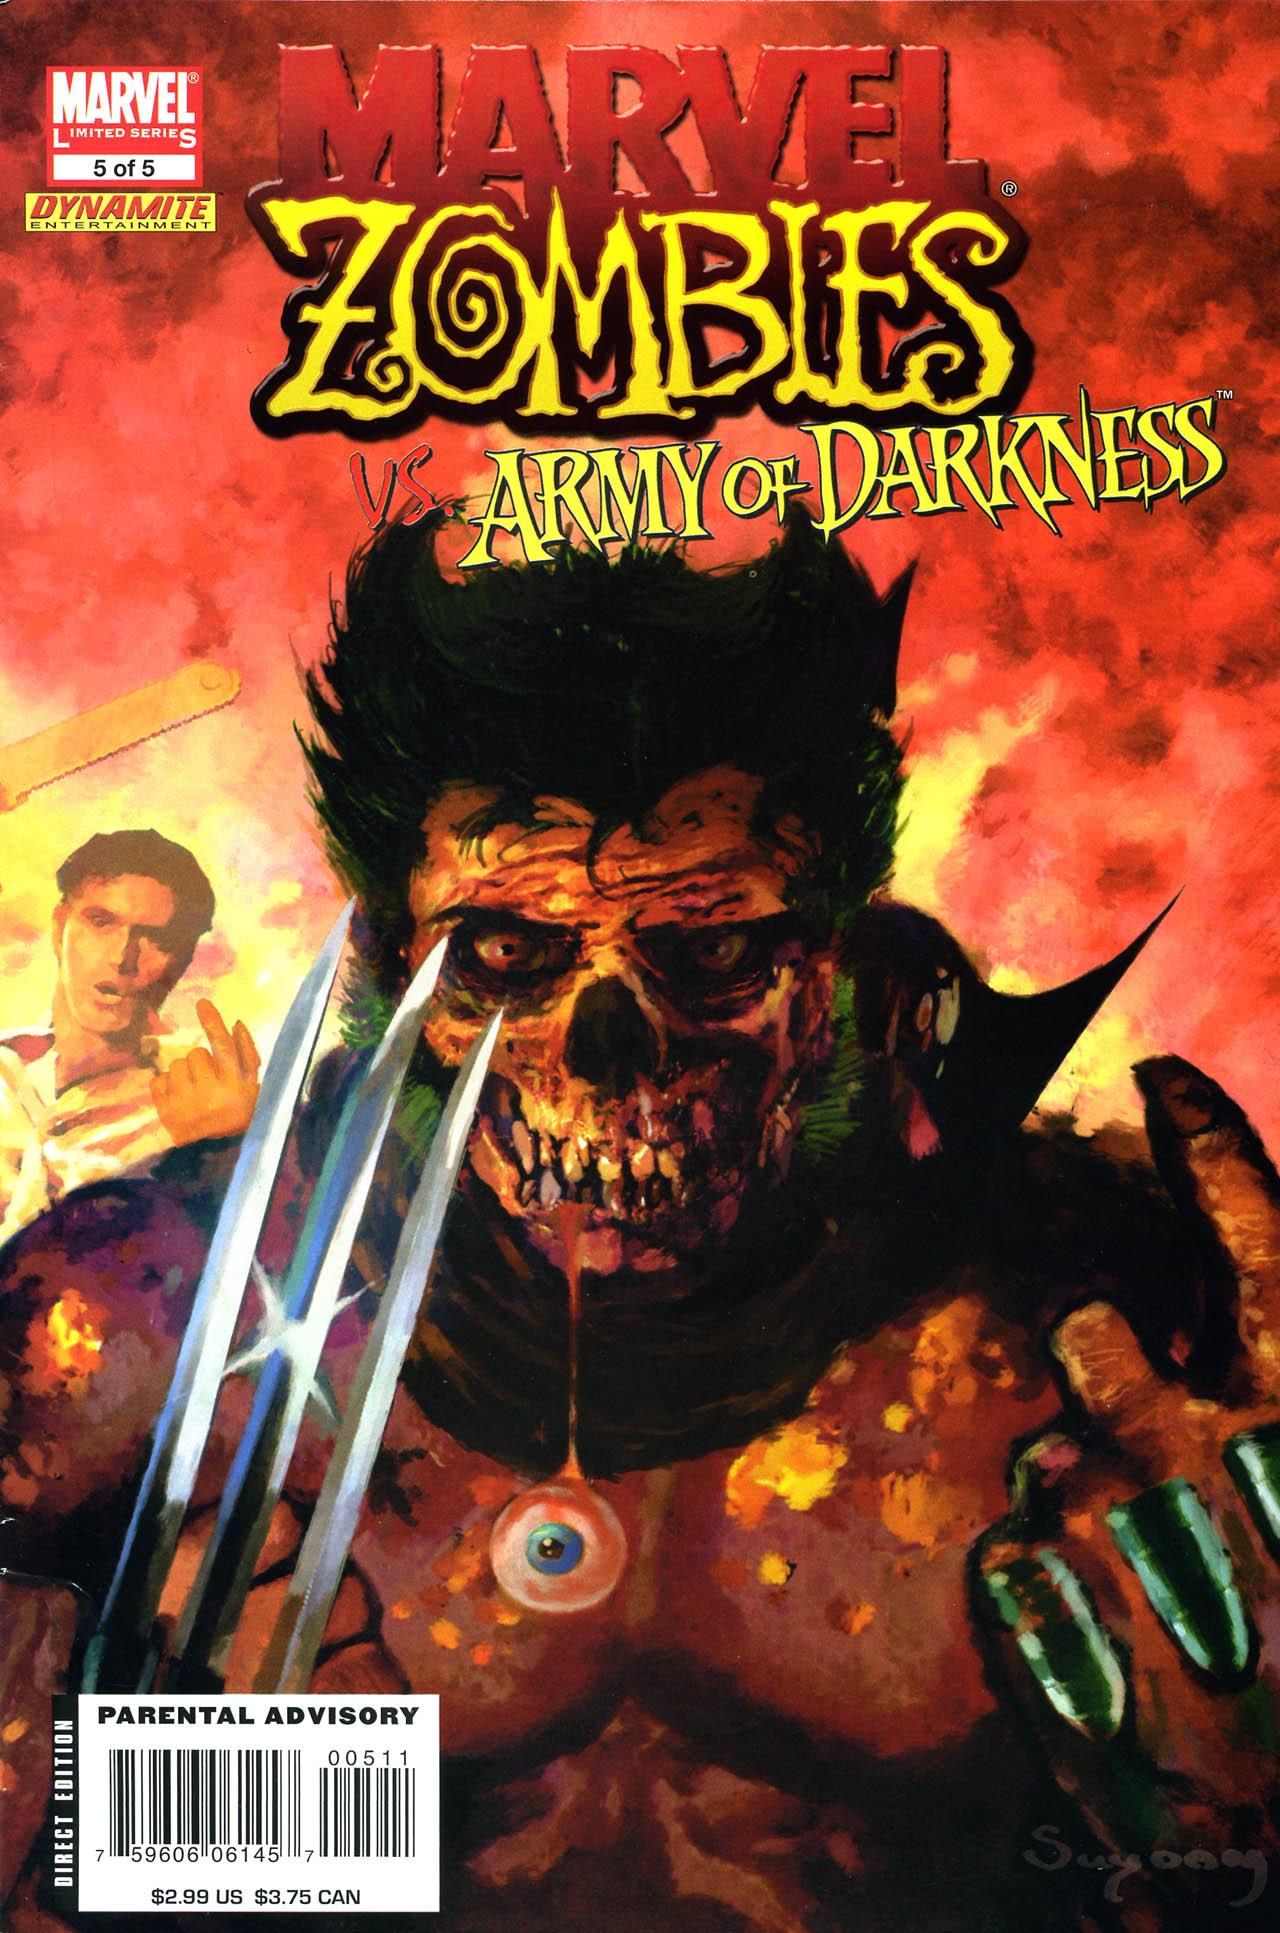 Marvel Zombies Vs. Army of Darkness Vol. 1 #5